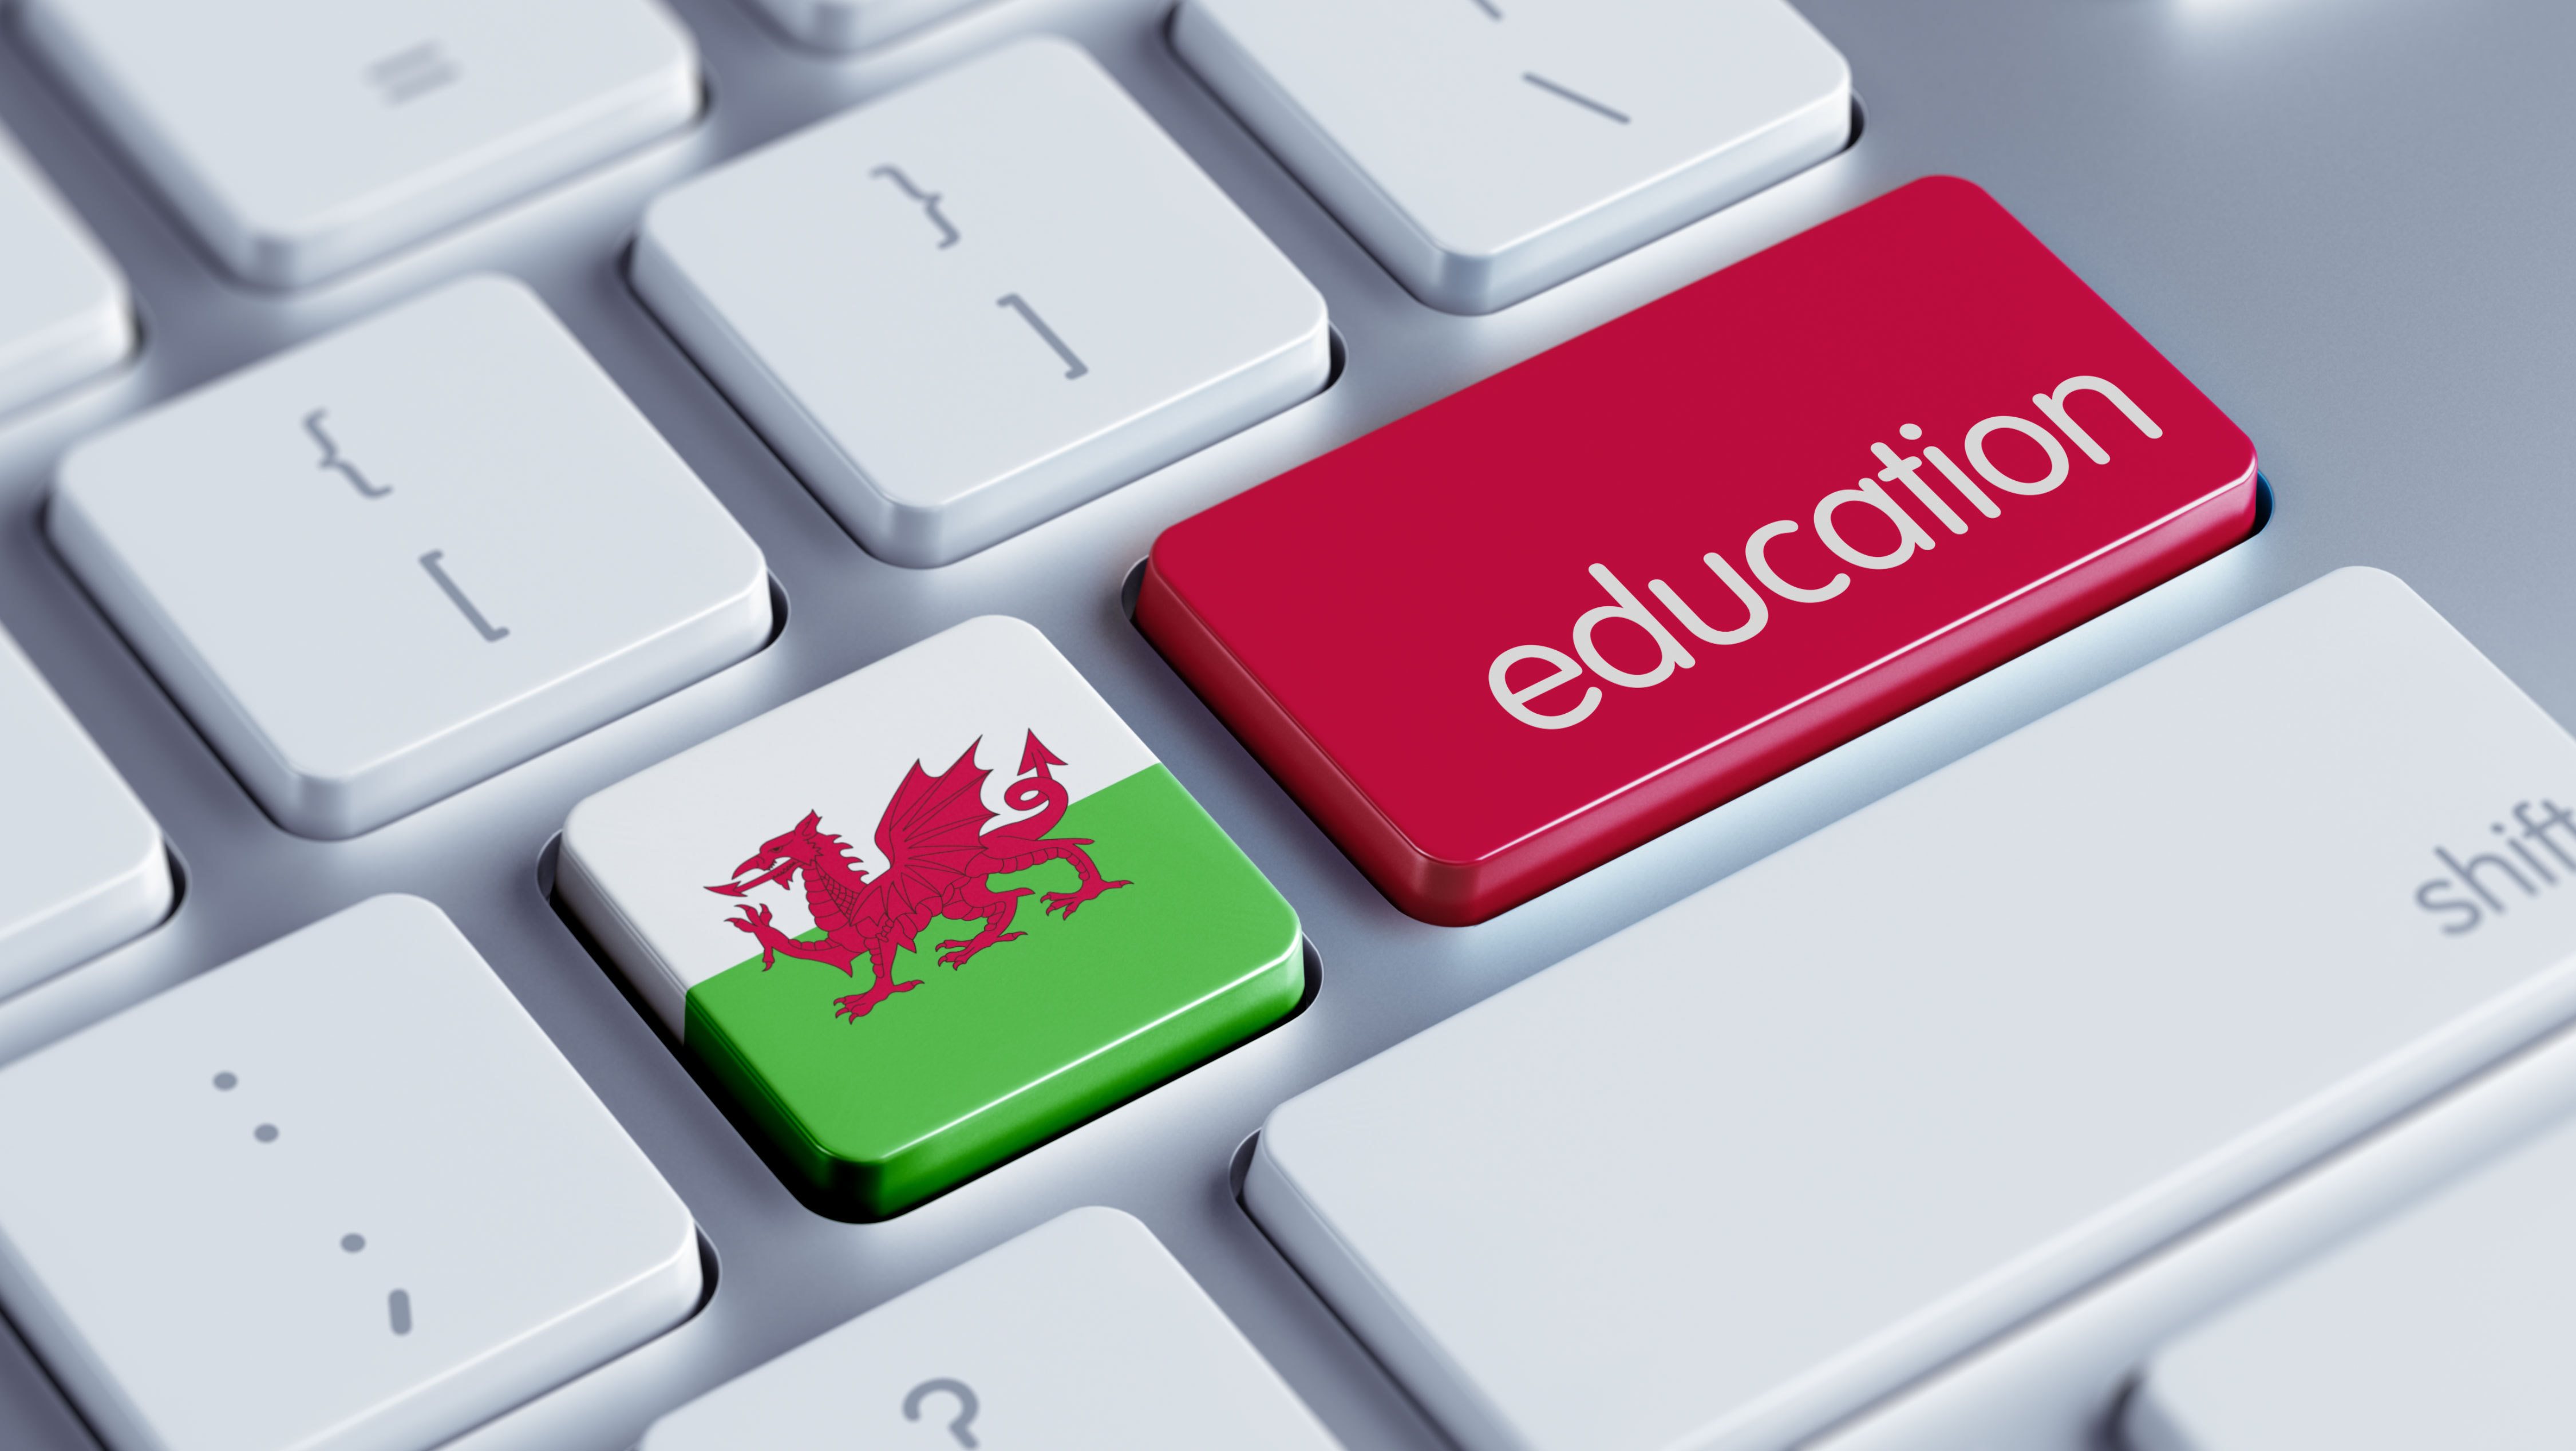 computer keyboard with the Welsh flag and the word 'education' on